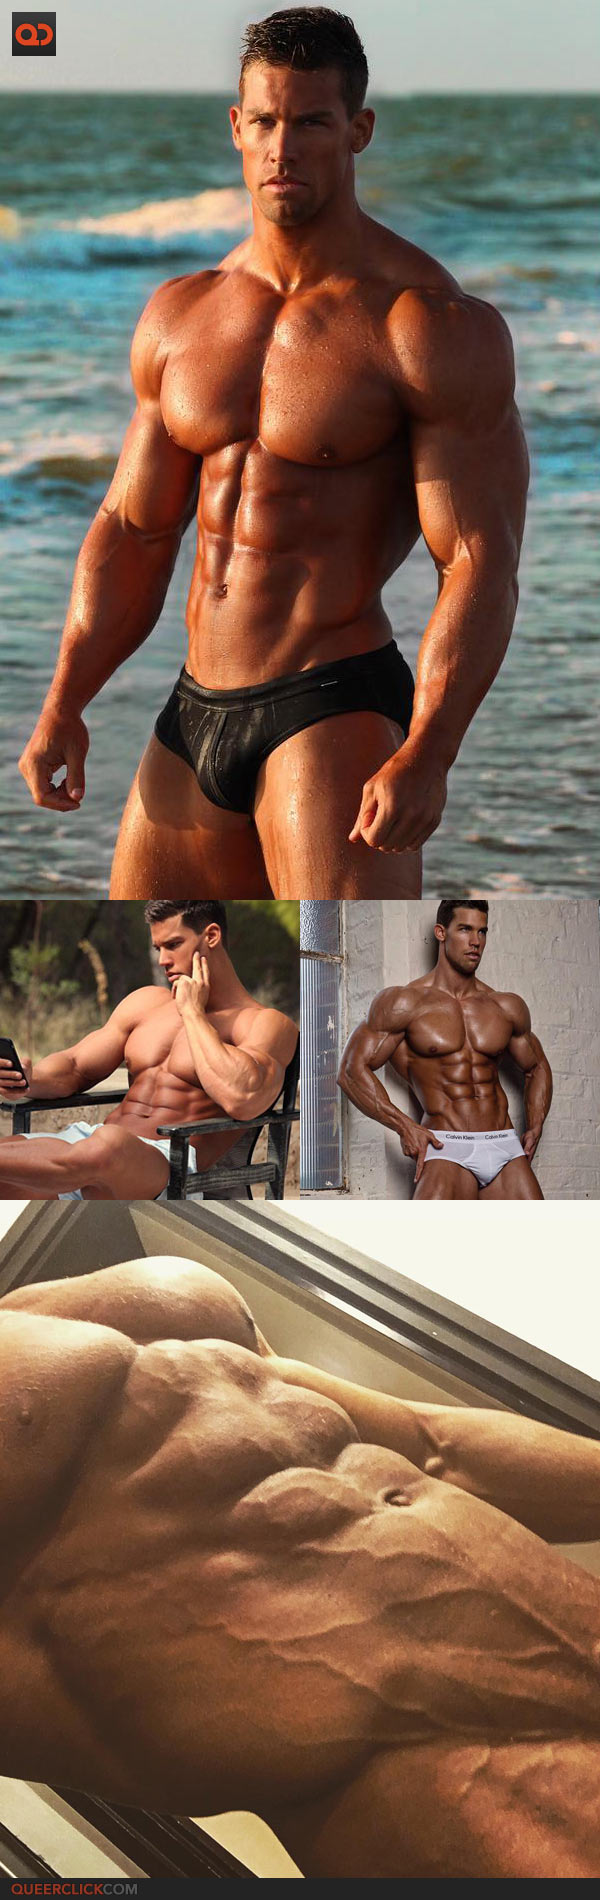 Ten “Pec”tacular Fitness Models From Instagram That You Need In Your Life This Week!